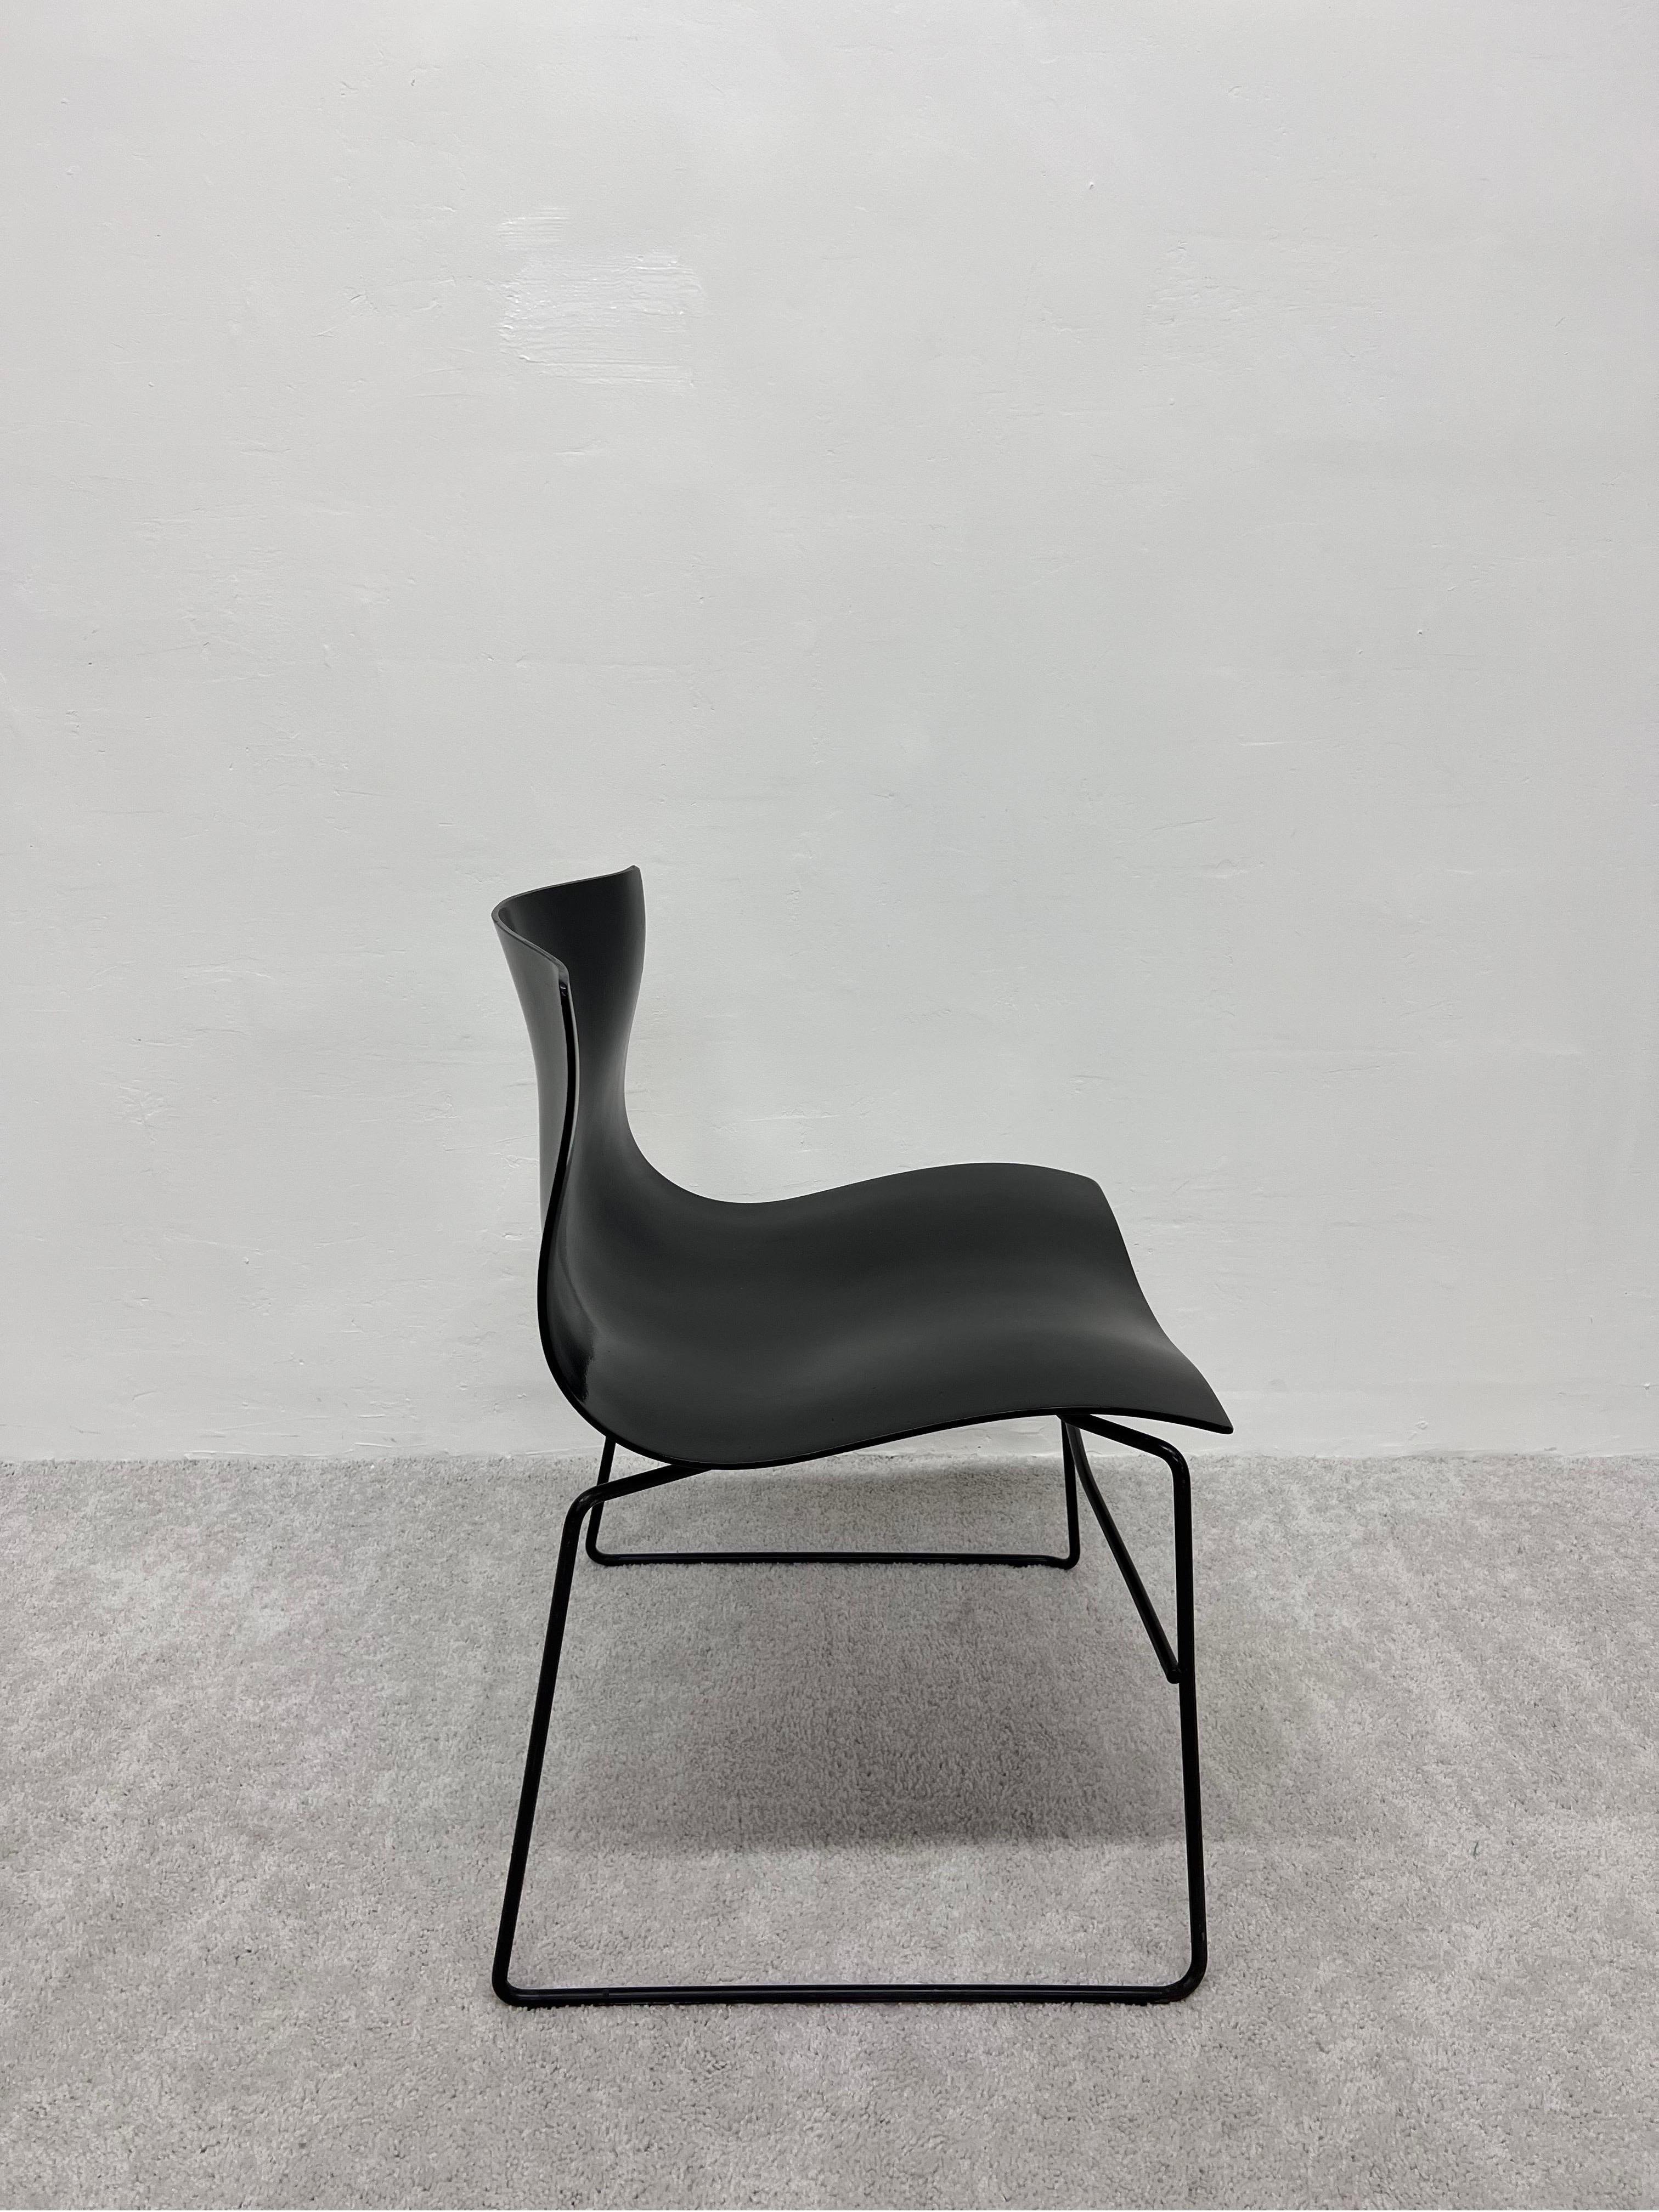 Post-Modern Lella and Massimo Vignelli Handkerchief Chairs for Knoll, Set of Four For Sale